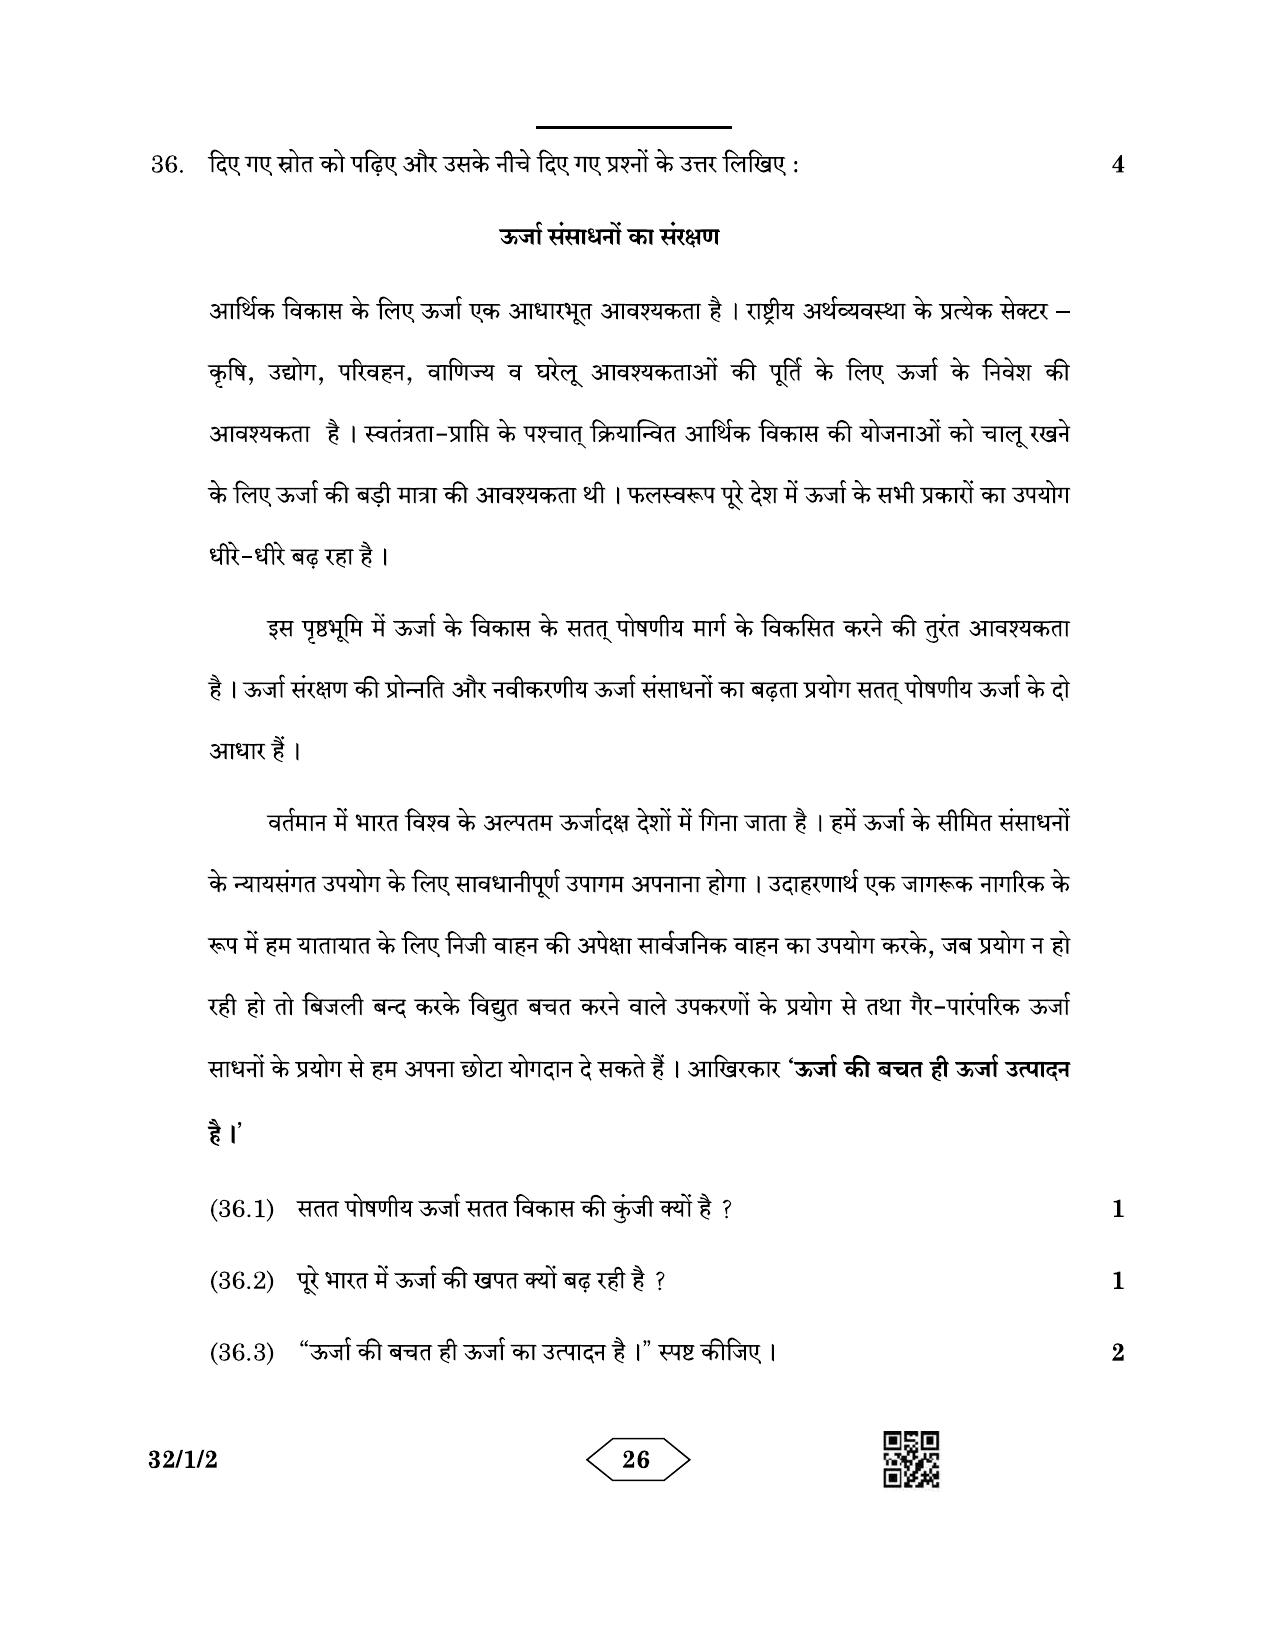 CBSE Class 10 32-1-2 Social Science 2023 Question Paper - Page 26